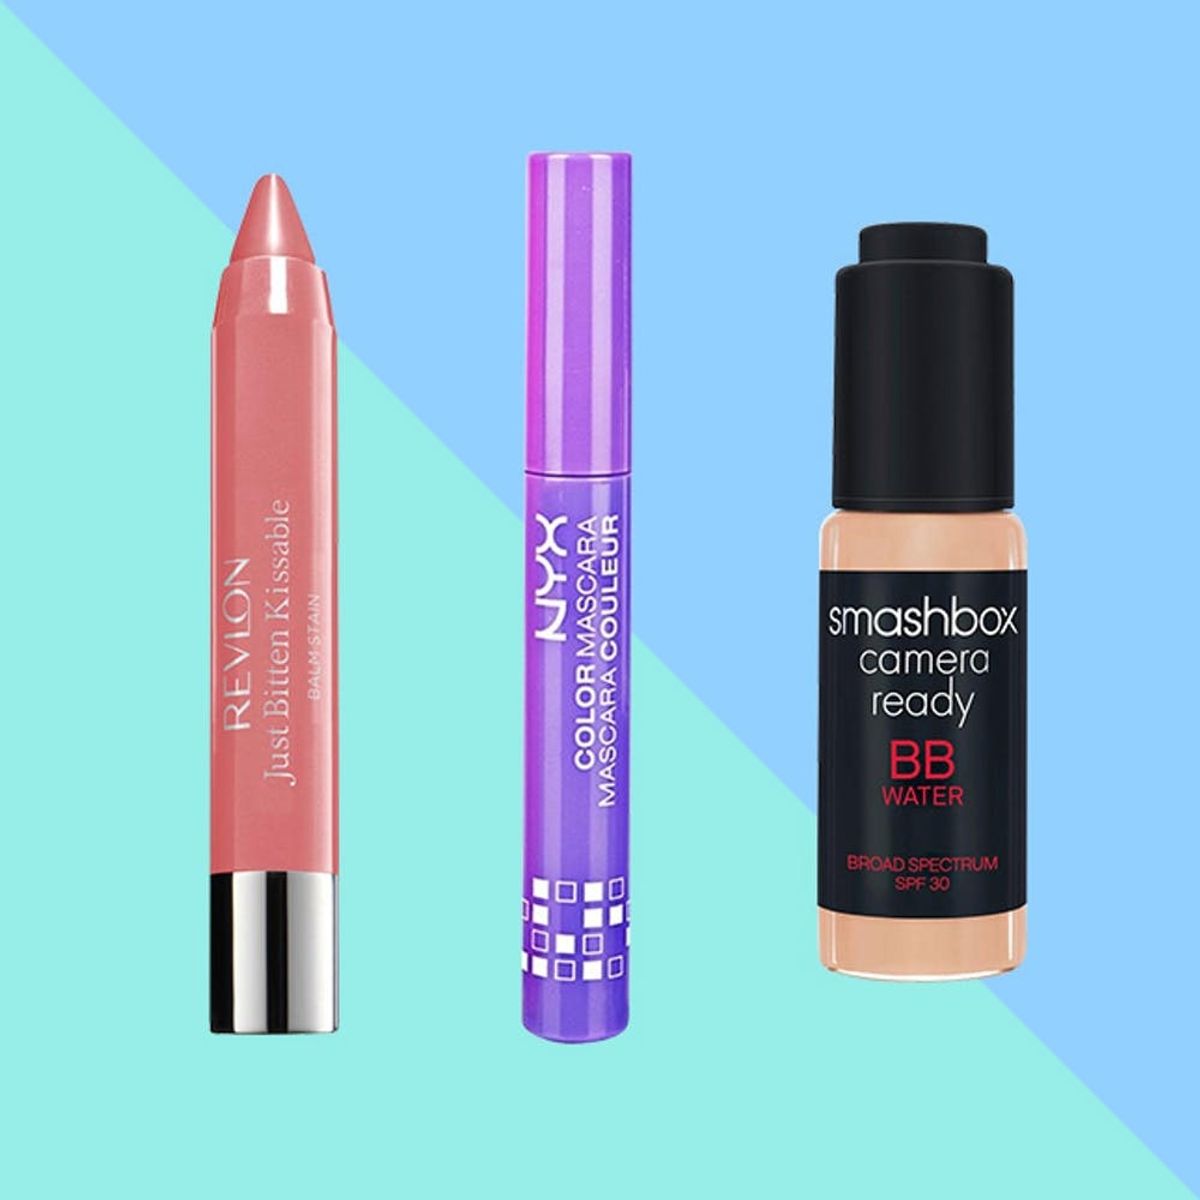 3 New Makeup Products You Should Try This Weekend